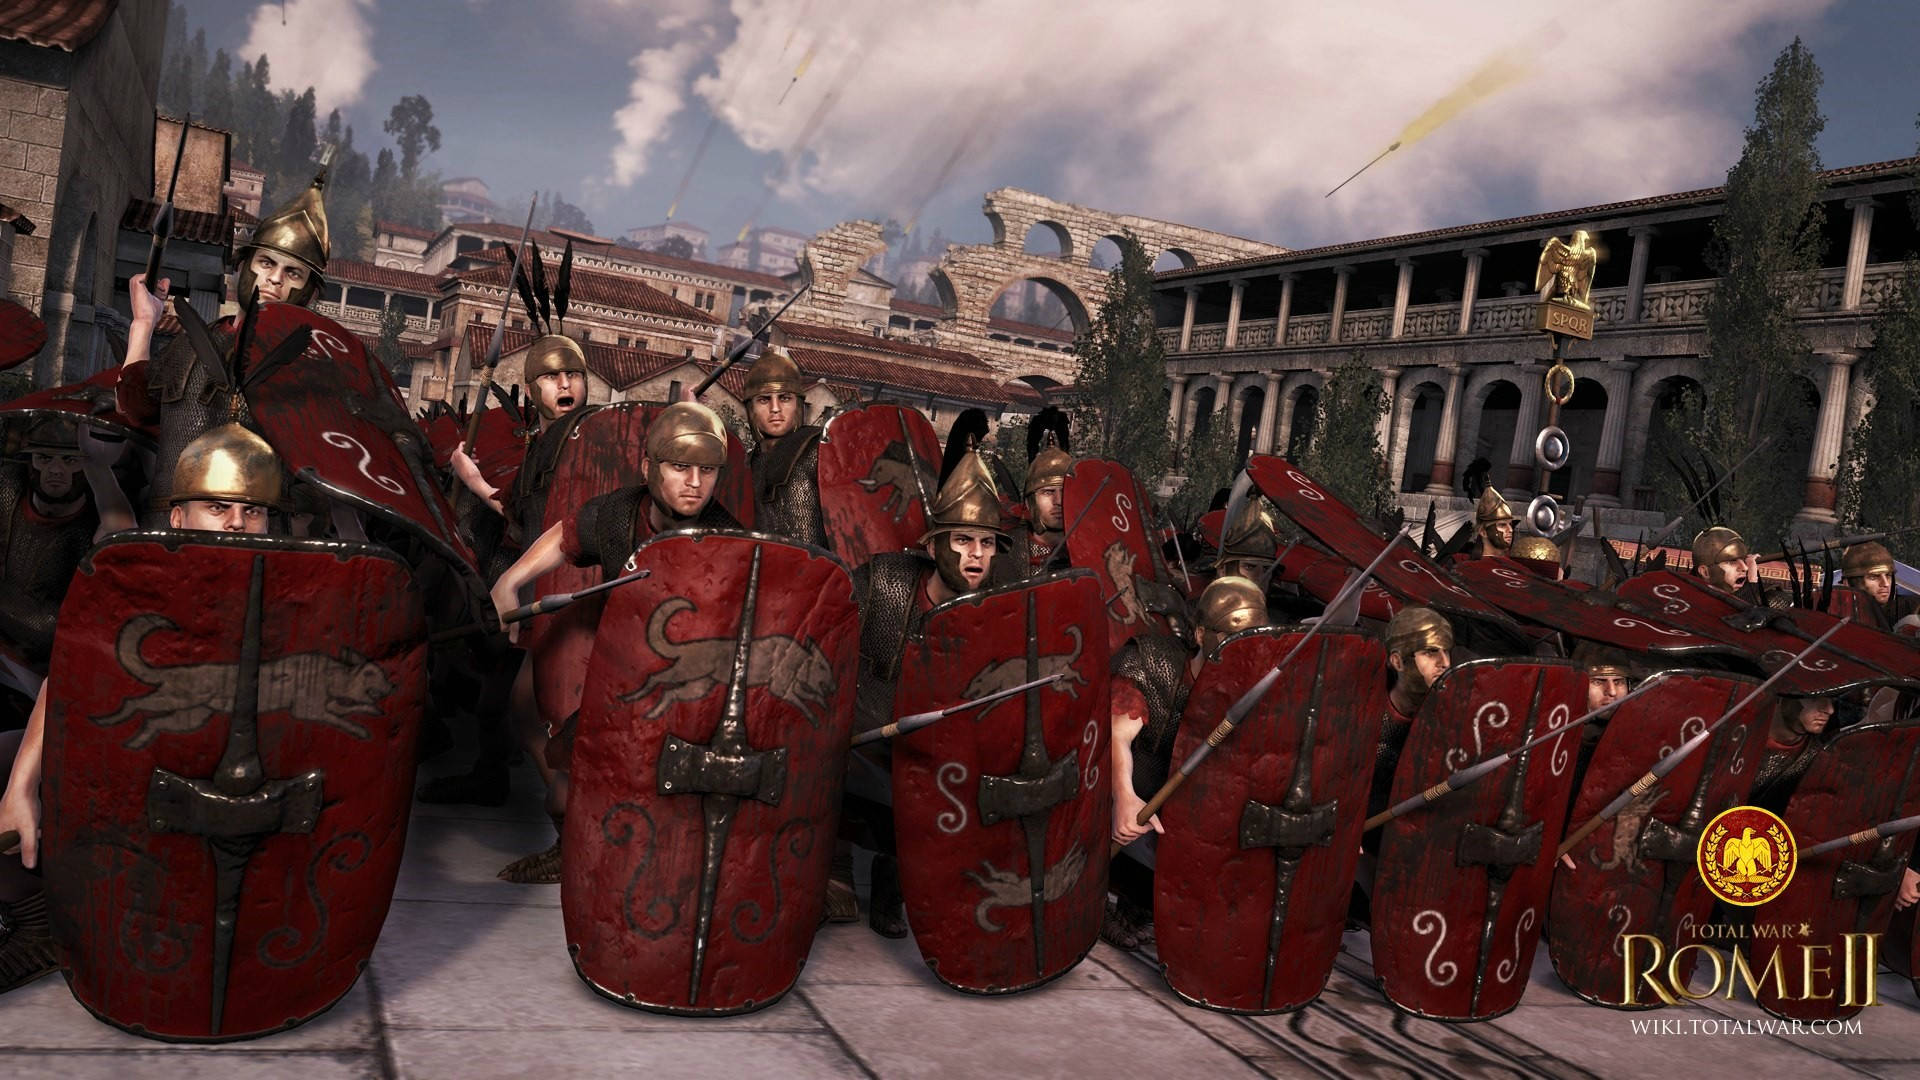 Rome 2 Roman Soldiers Background